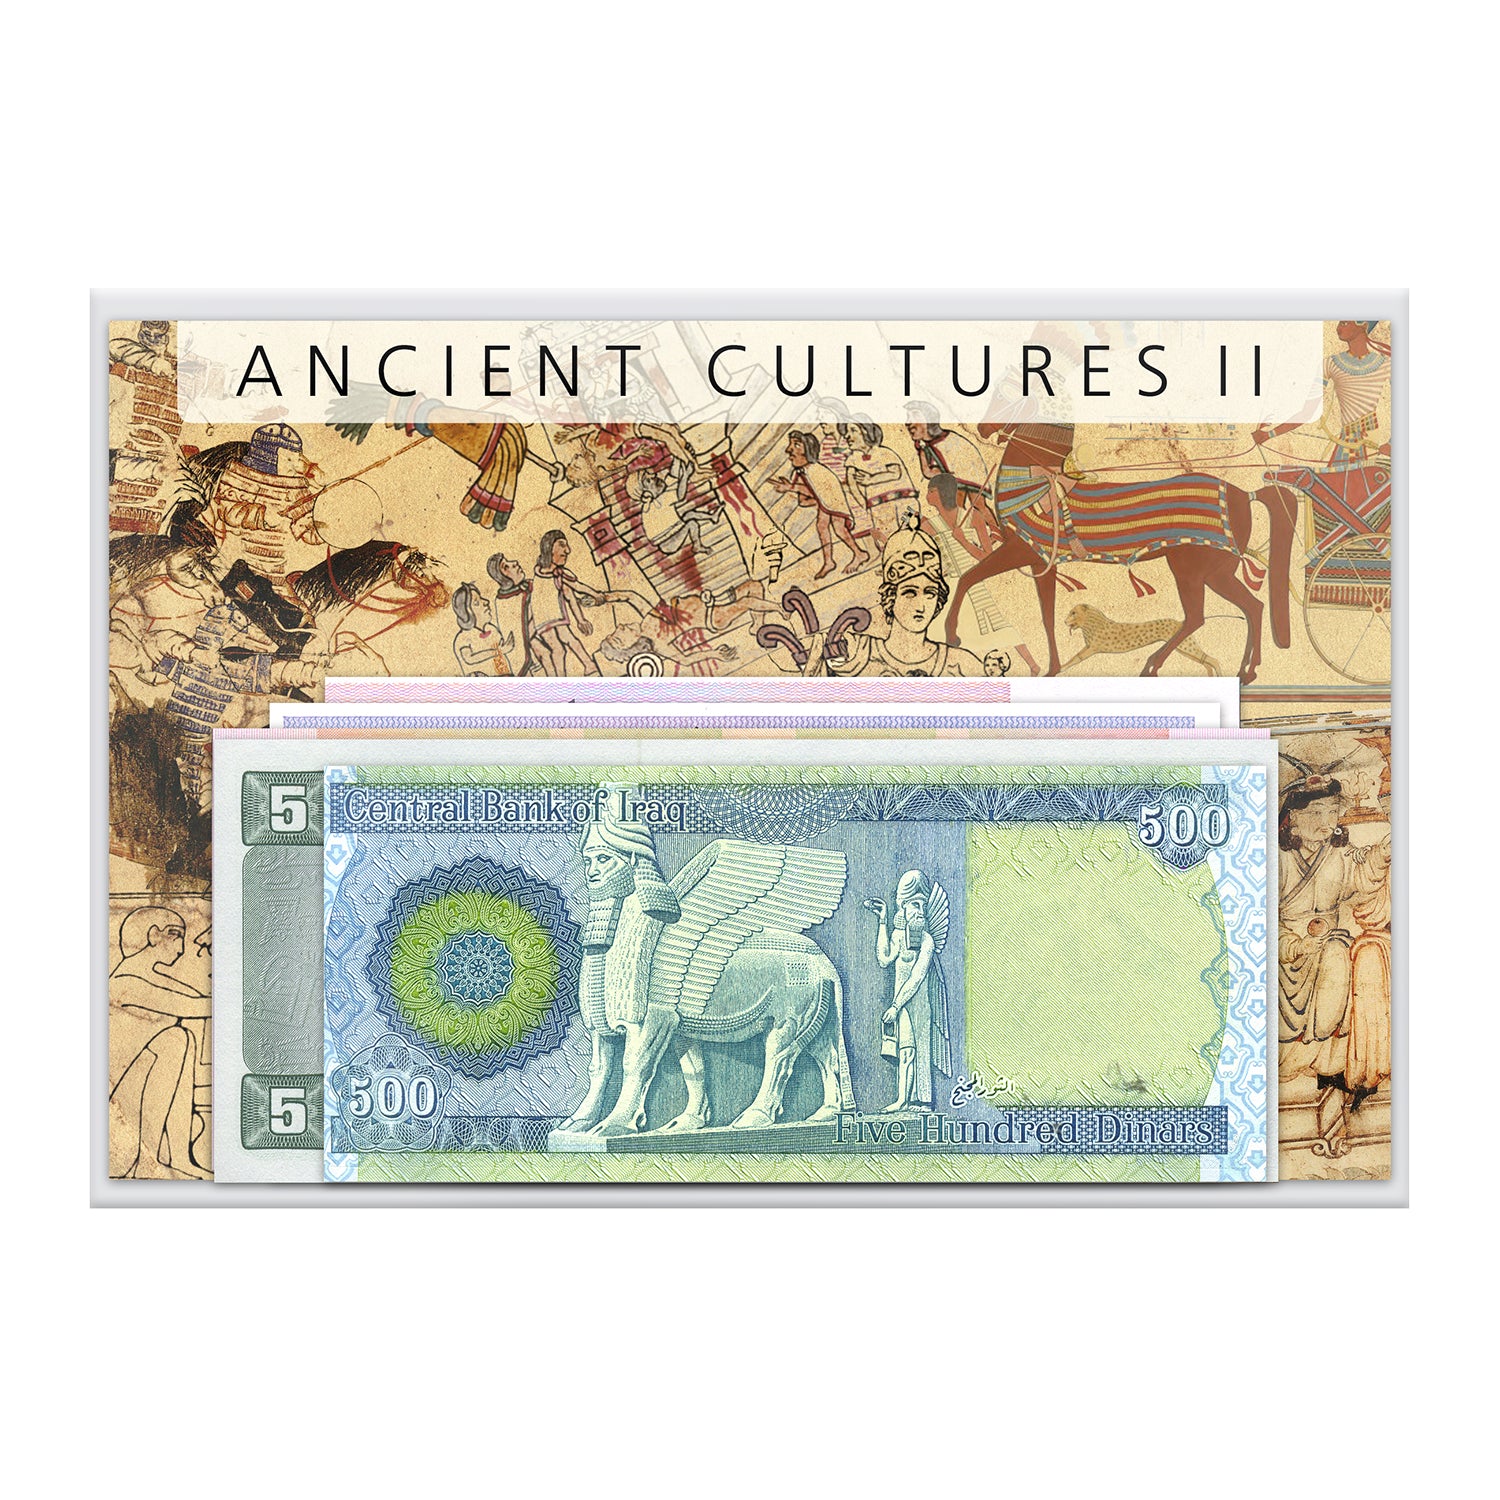 Billet Collection "Cultures Anciennes II"